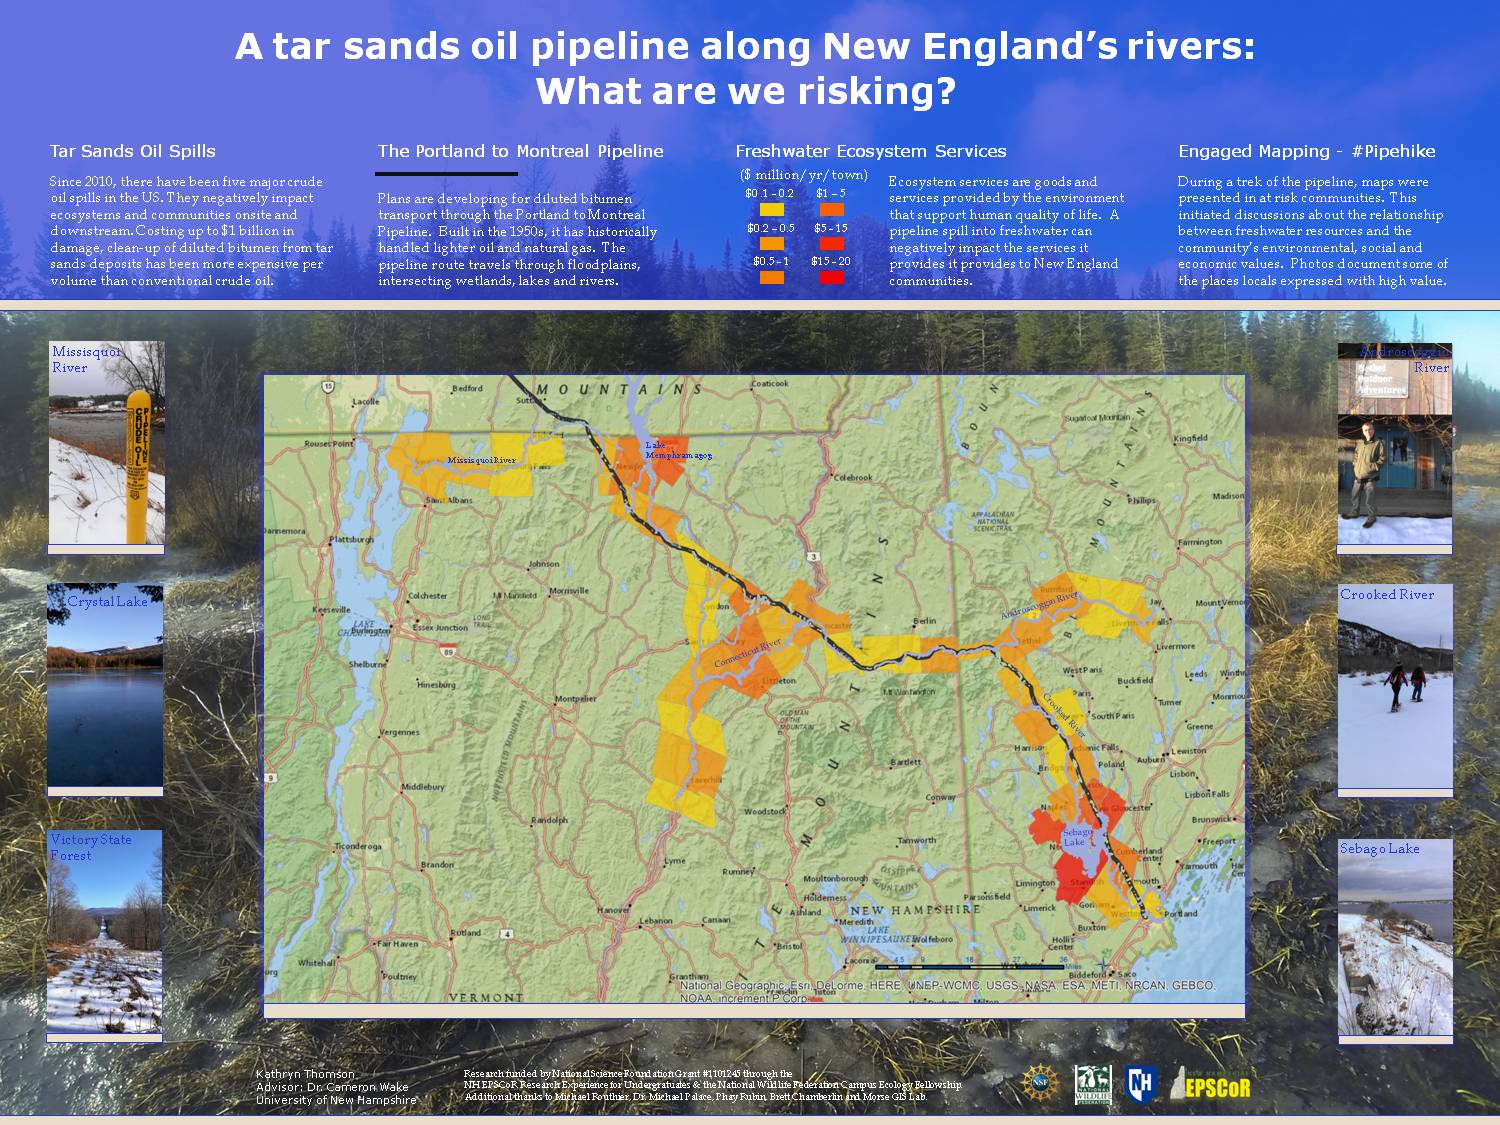 What Are We Risking? Oil Pipeline In New England by kpb39